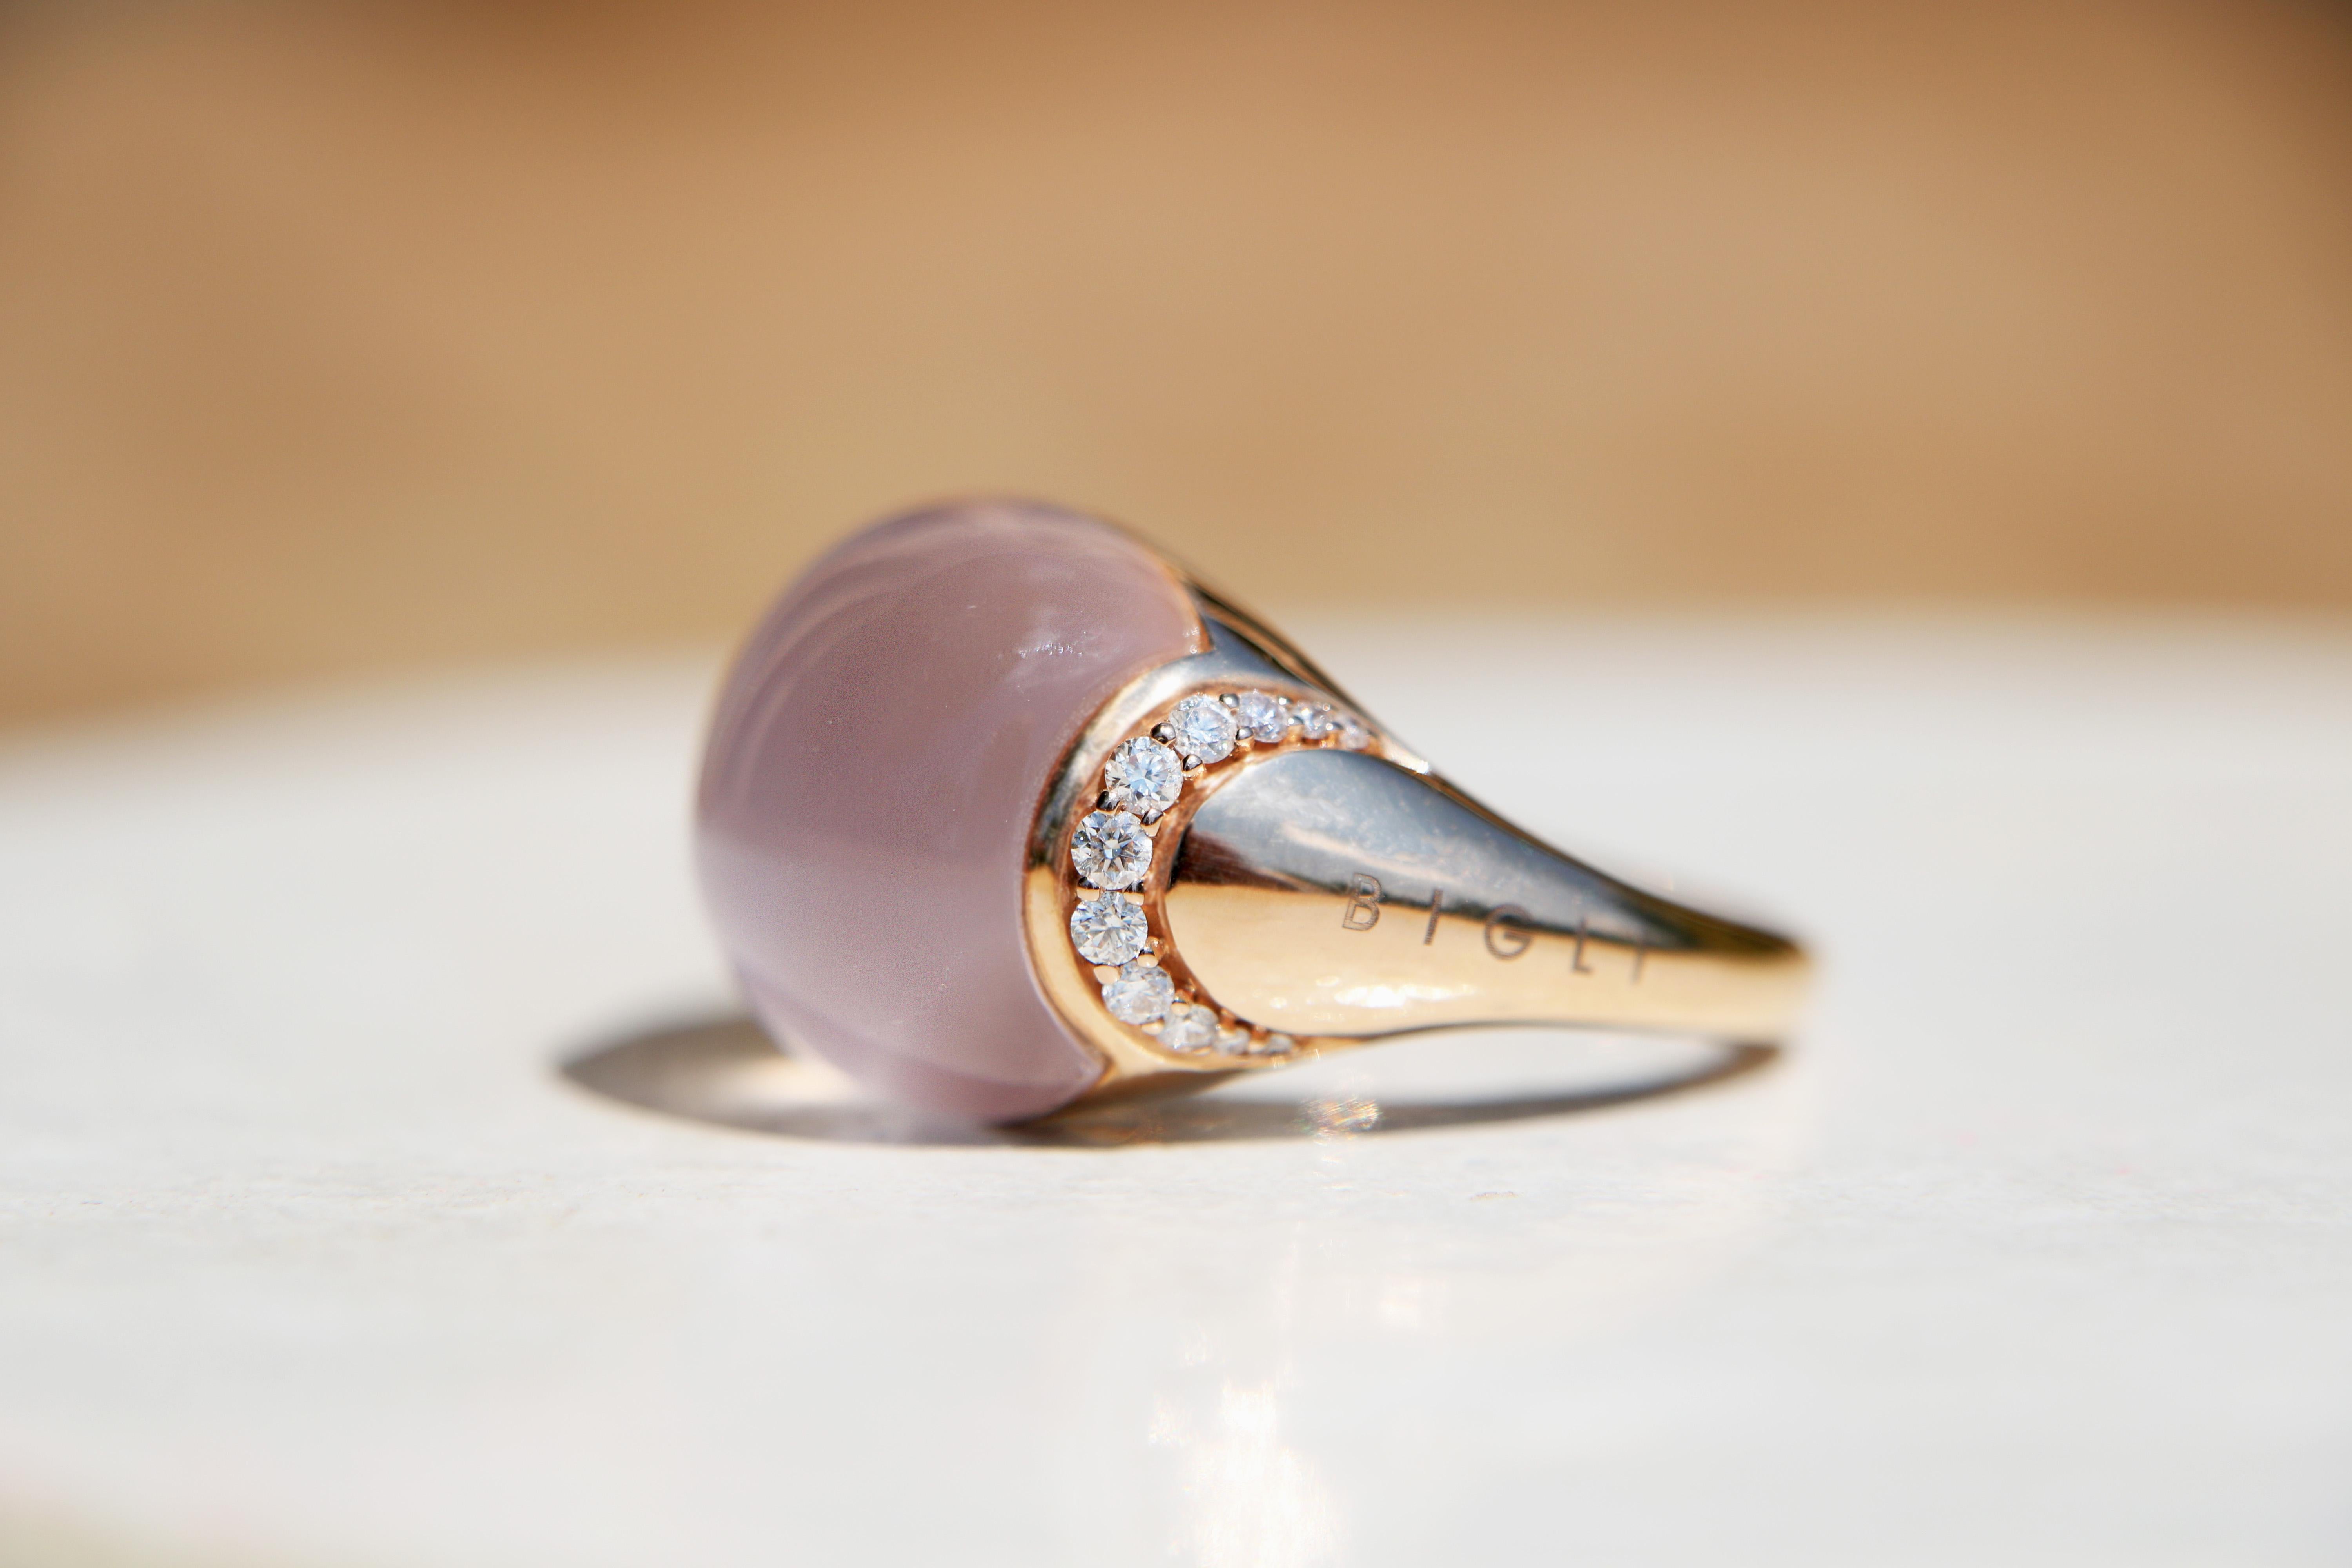 Moon ring in 18kt rose gold with Pink Quartz, Mother of Pearl and diamonds (0.3ct).

Reference: 20R99Rpqmpdia
Stone combination: Pink Quartz
Color gold: rose
Diamond: 0,3 ct
Size: 56 - Can not be altered

Please note that this ring has a delivery